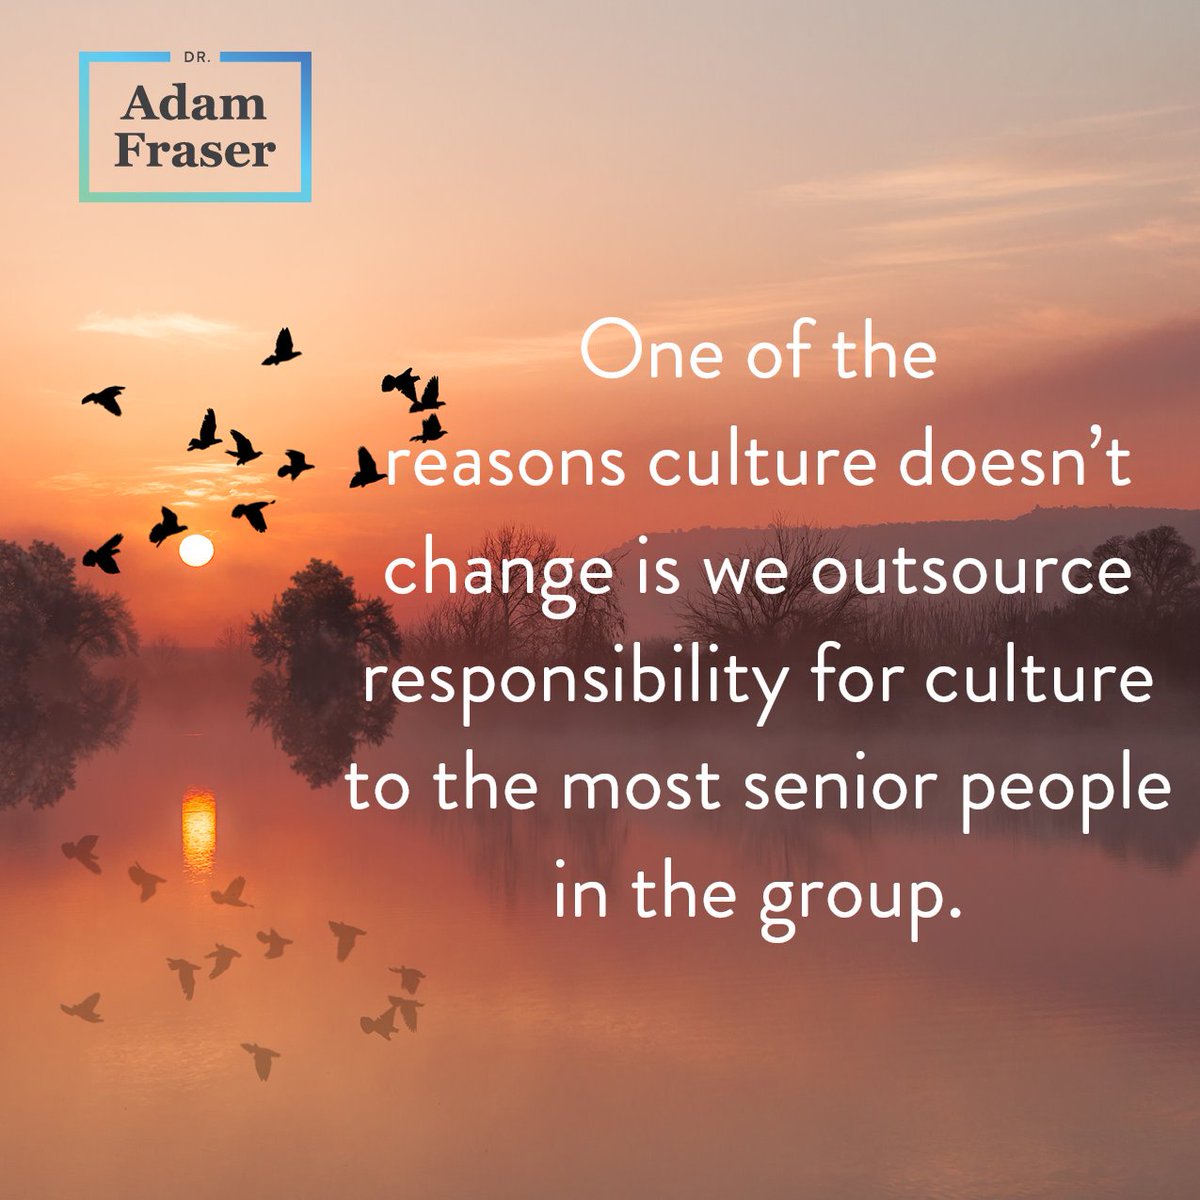 Everyone affects the culture of an organisation.

Do you agree with this?

#dradamfraser #rippleeffect #workplaceculture